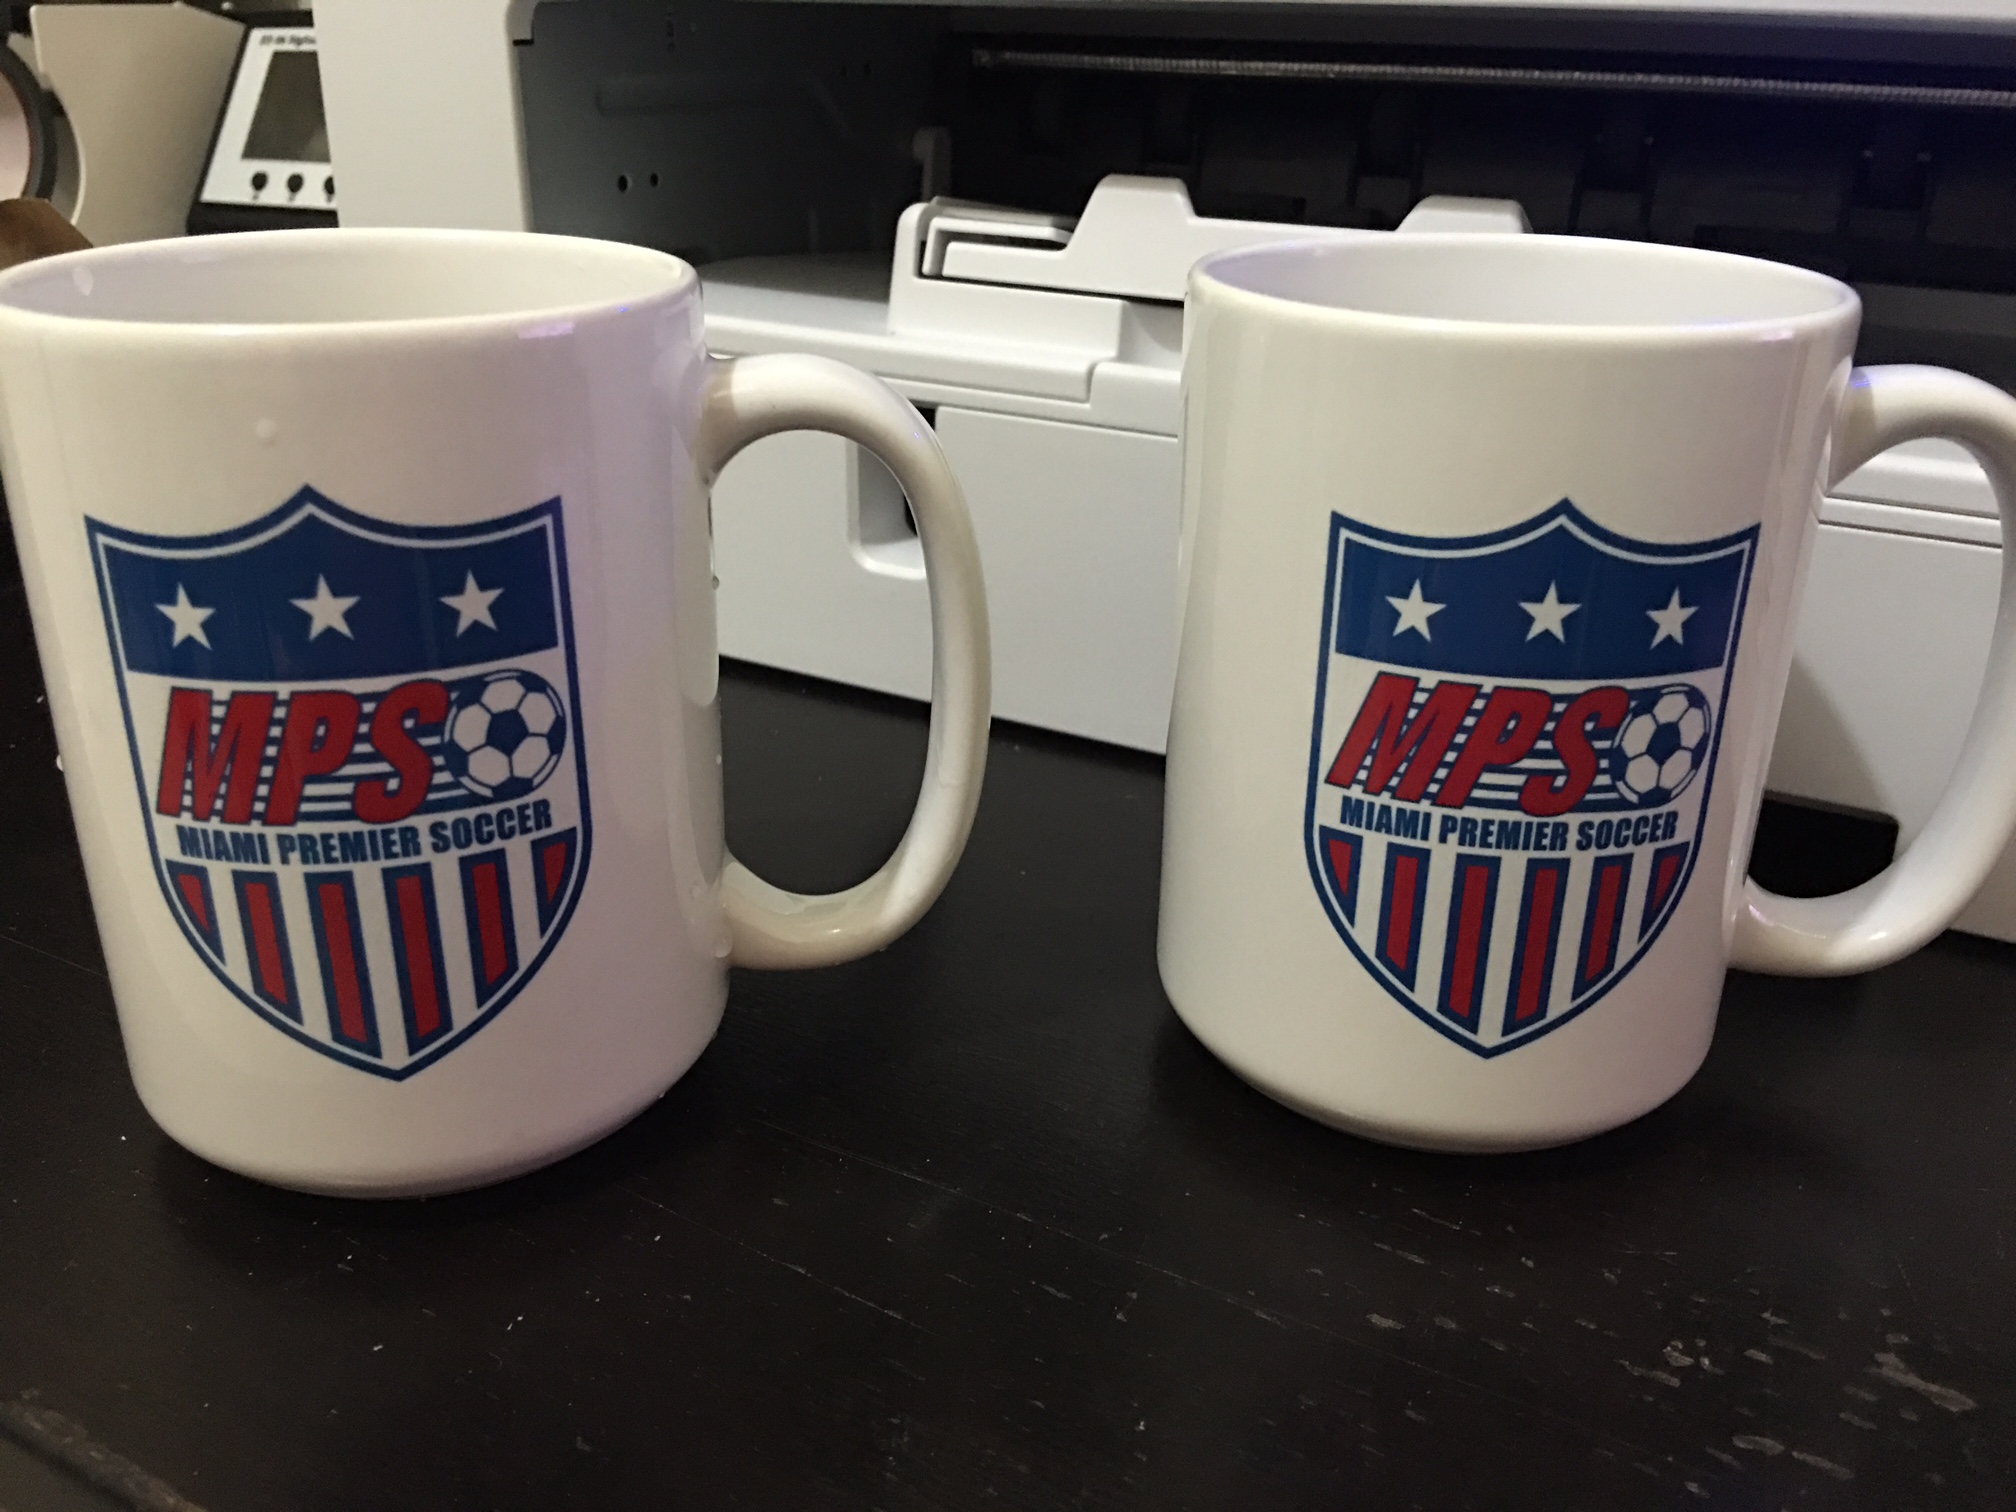 Mugs we made as a gift for one of our customers Miami Premier Soccer.